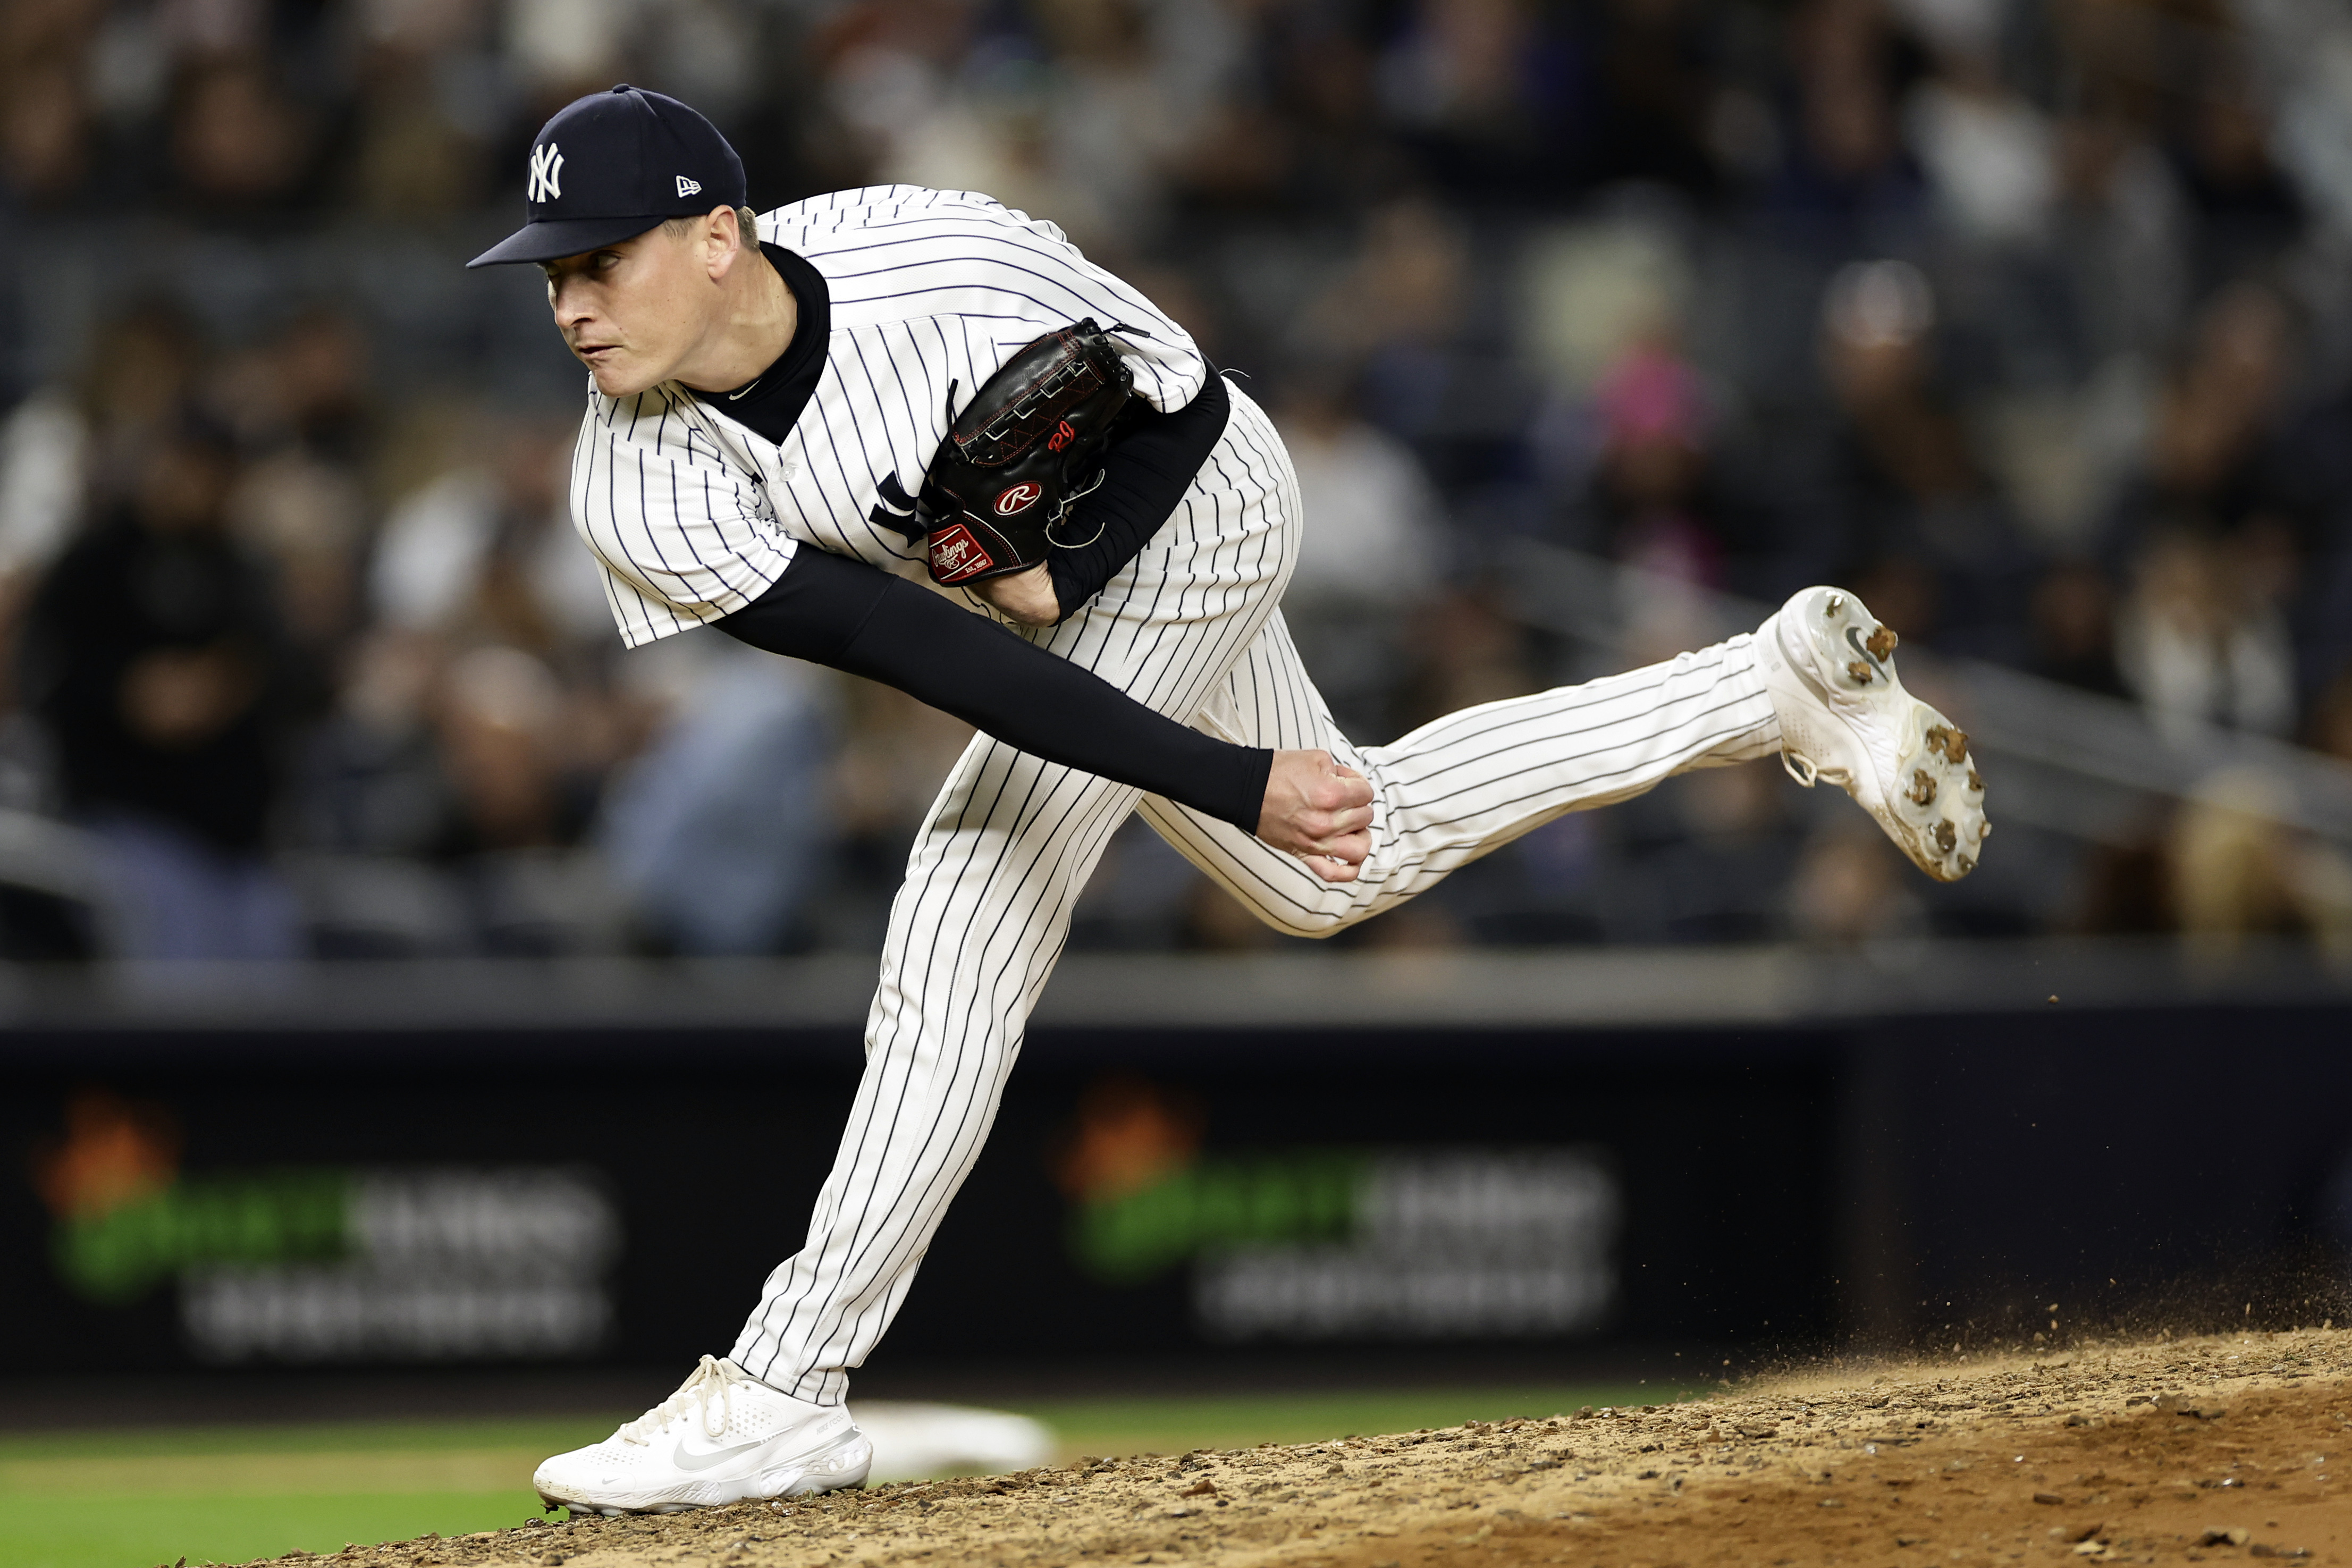 MLB: New York Yankees continue to be plagued by injuries